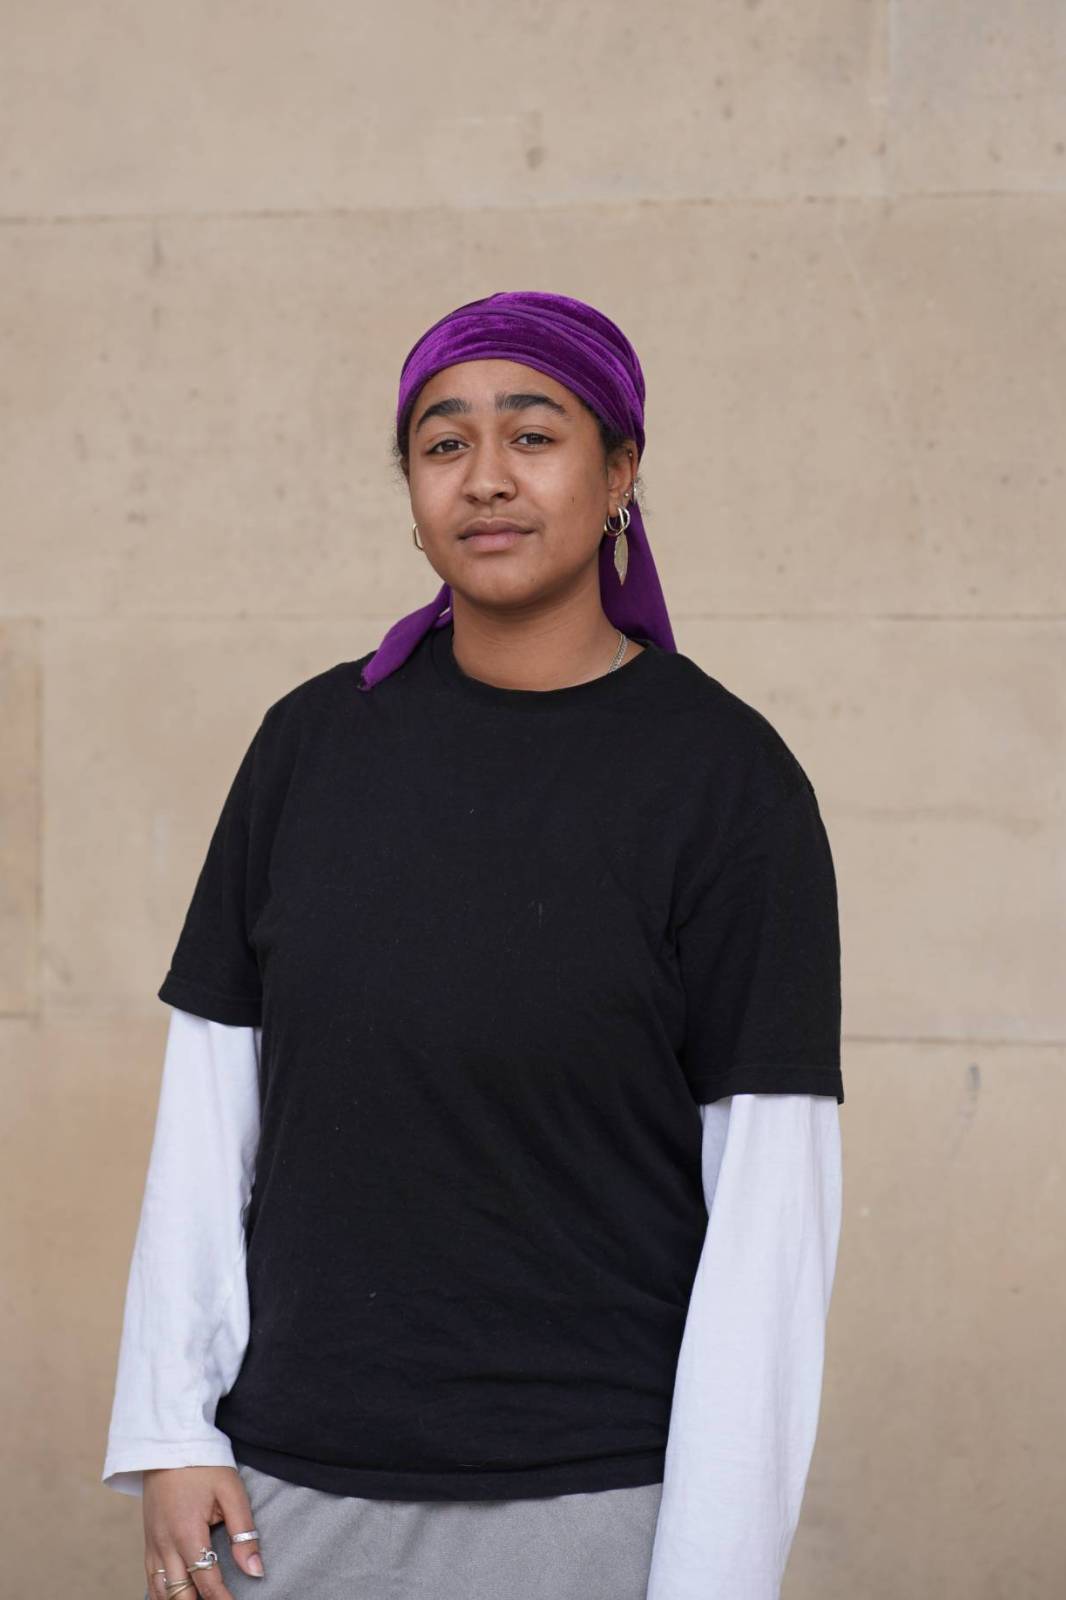 An image of Seyi standing in front of a beige stone background. They are wearing a purple head scarf tied at the back and a black tshirt with a white long-sleeve underneath.